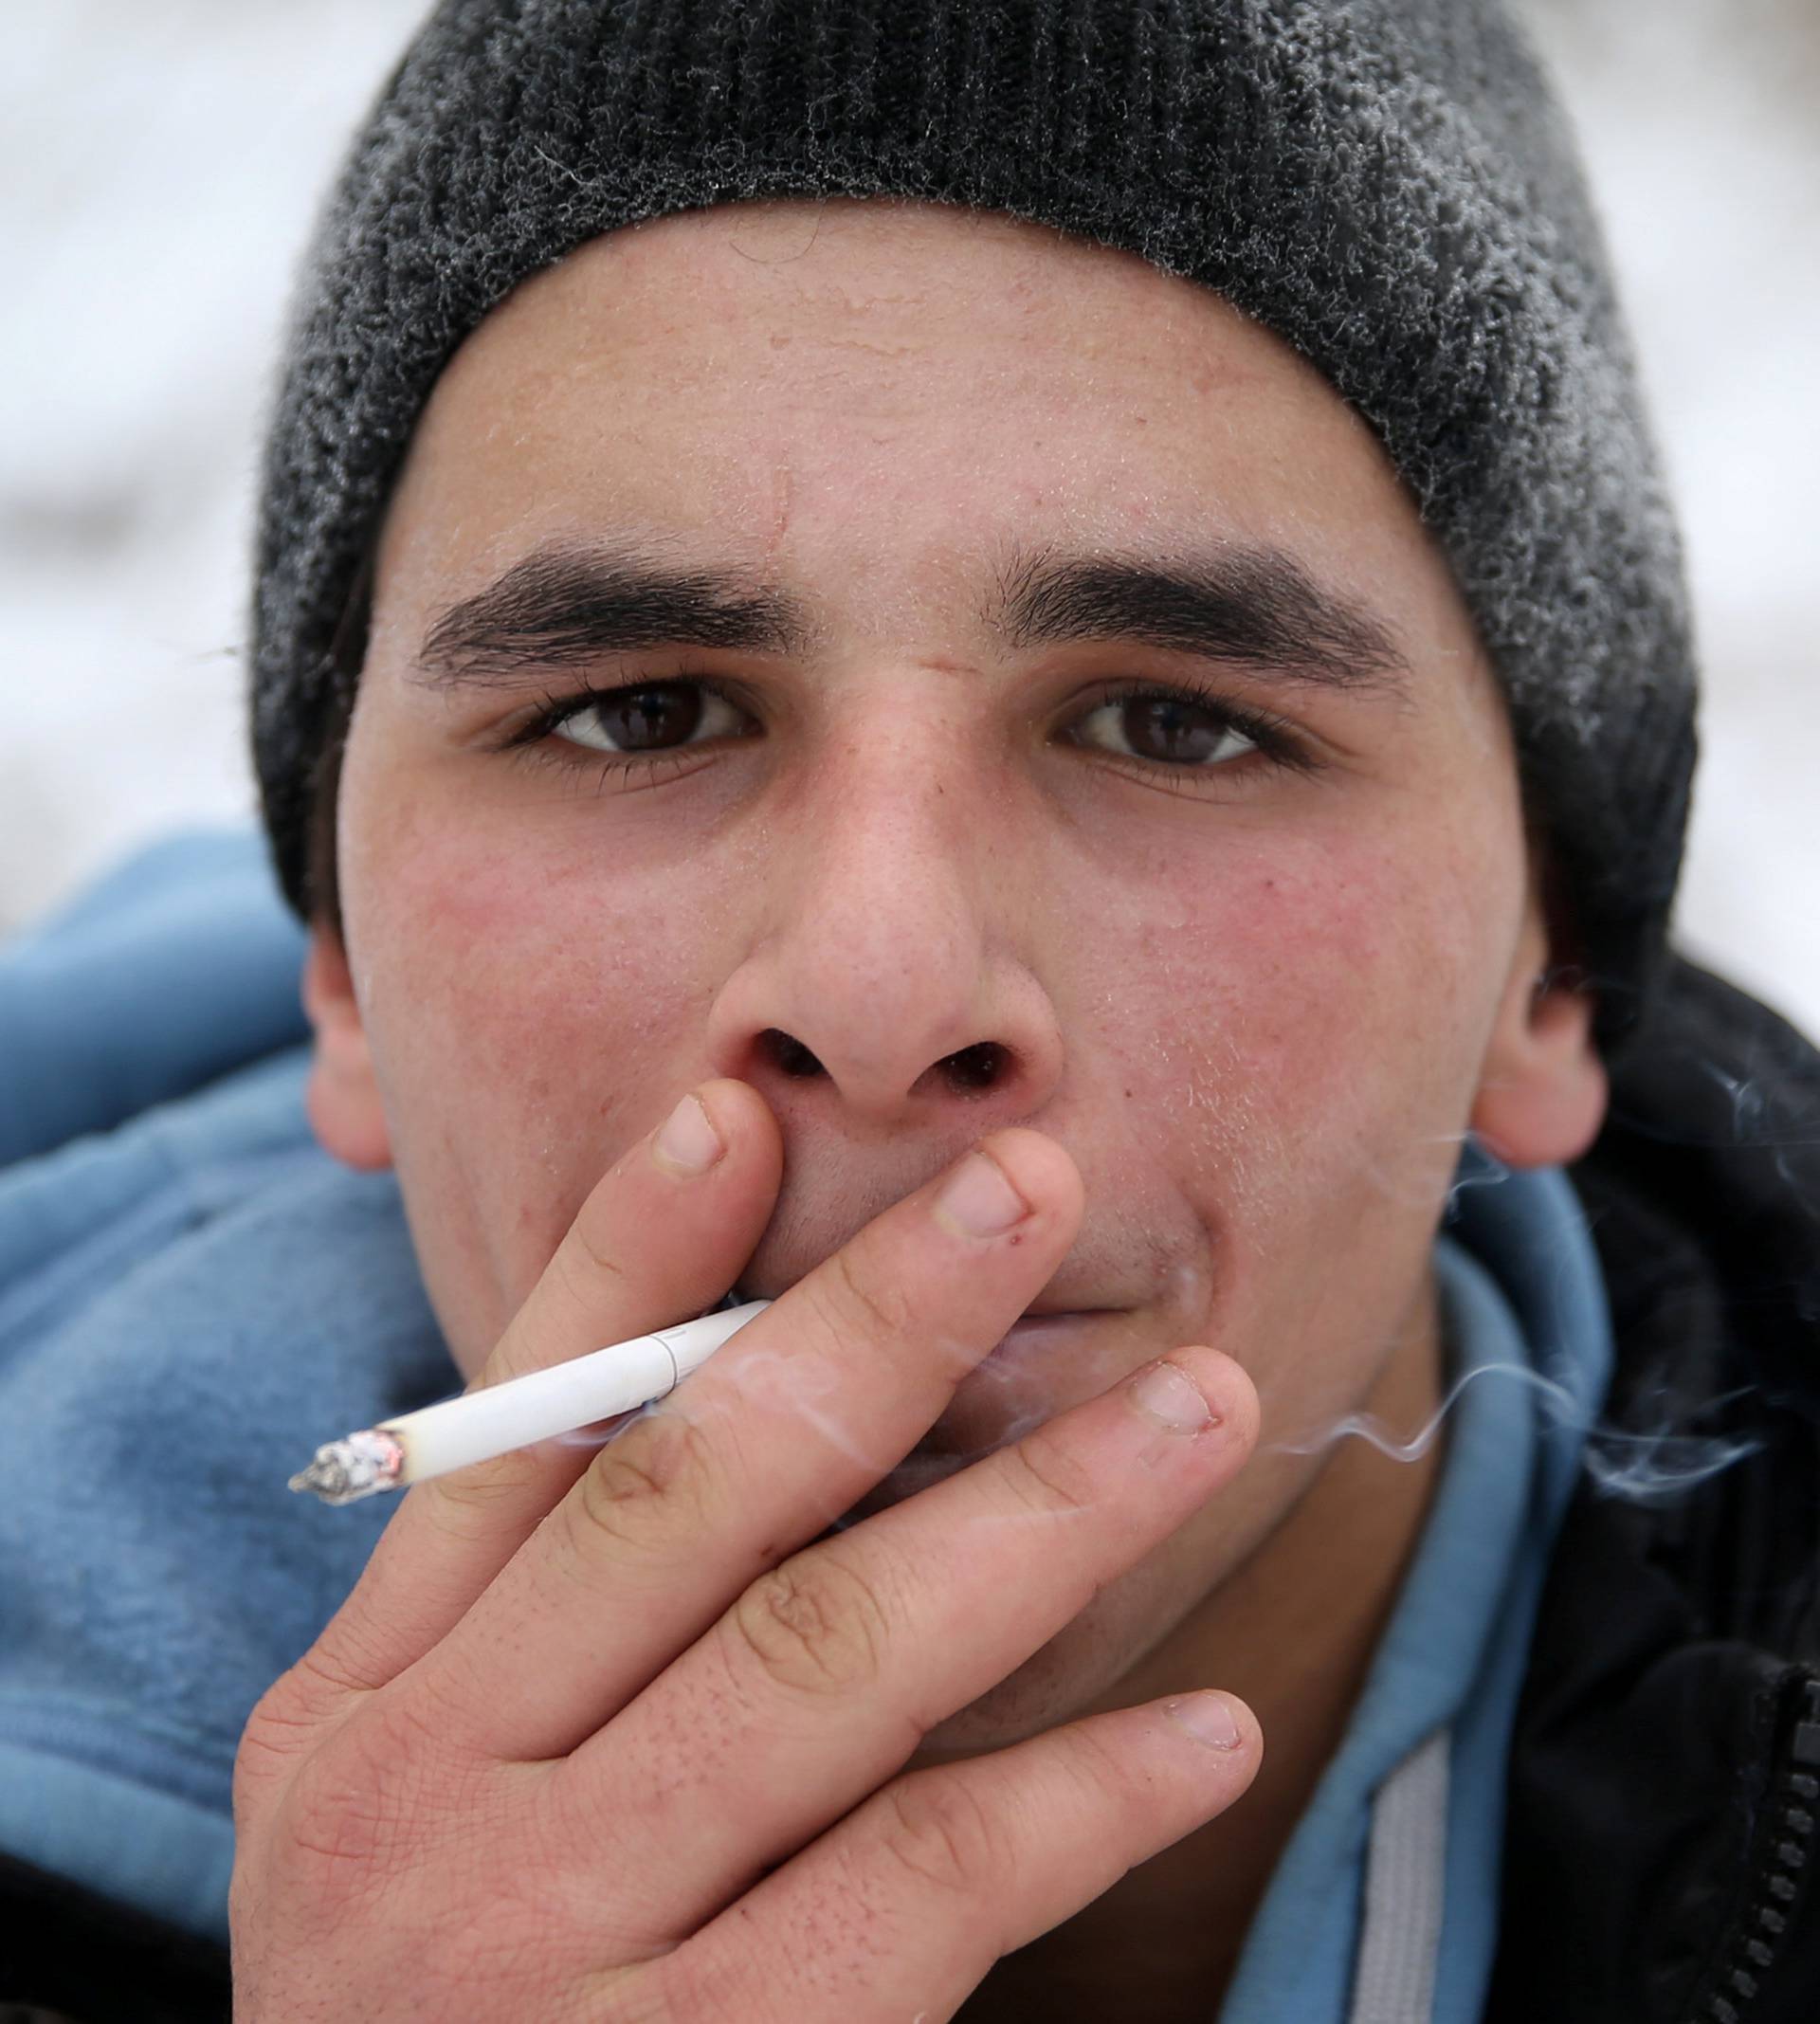 A migrant smokes while attempting to illegally cross the border into Croatia on the Pljesevica Mountain near Bihac